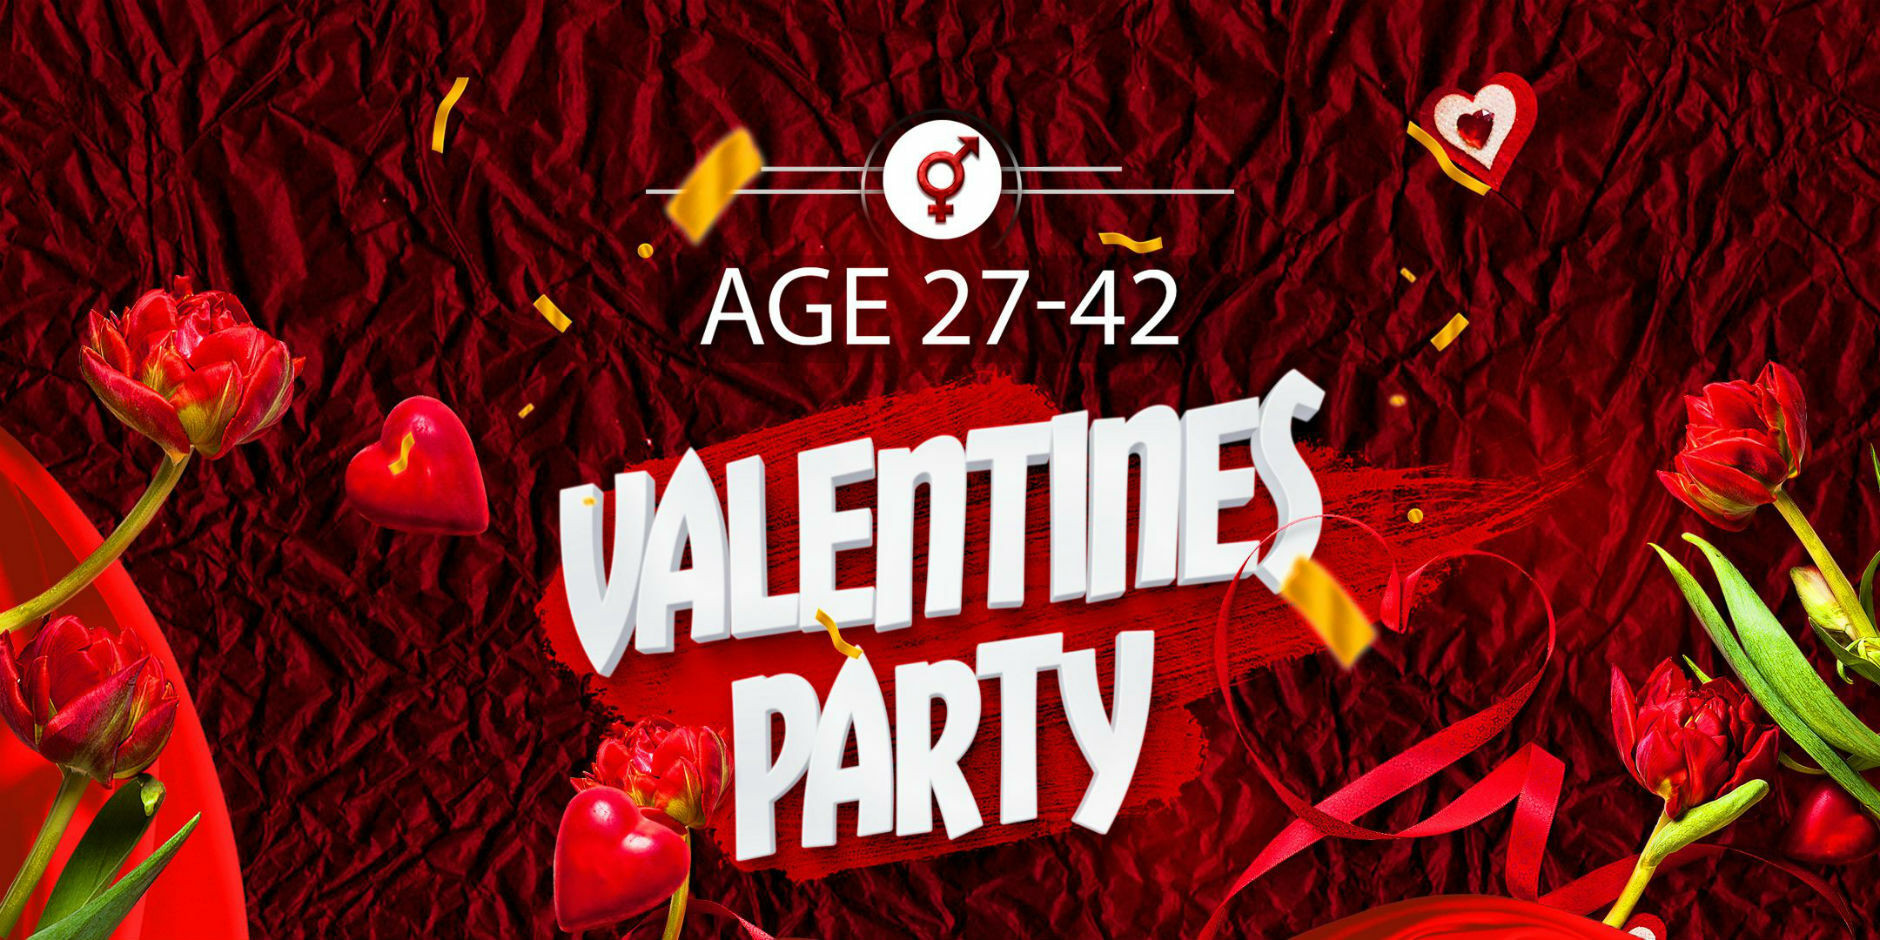 Valentines Day Single Party
 Valentines Singles Party Age 27 42 Melbourne